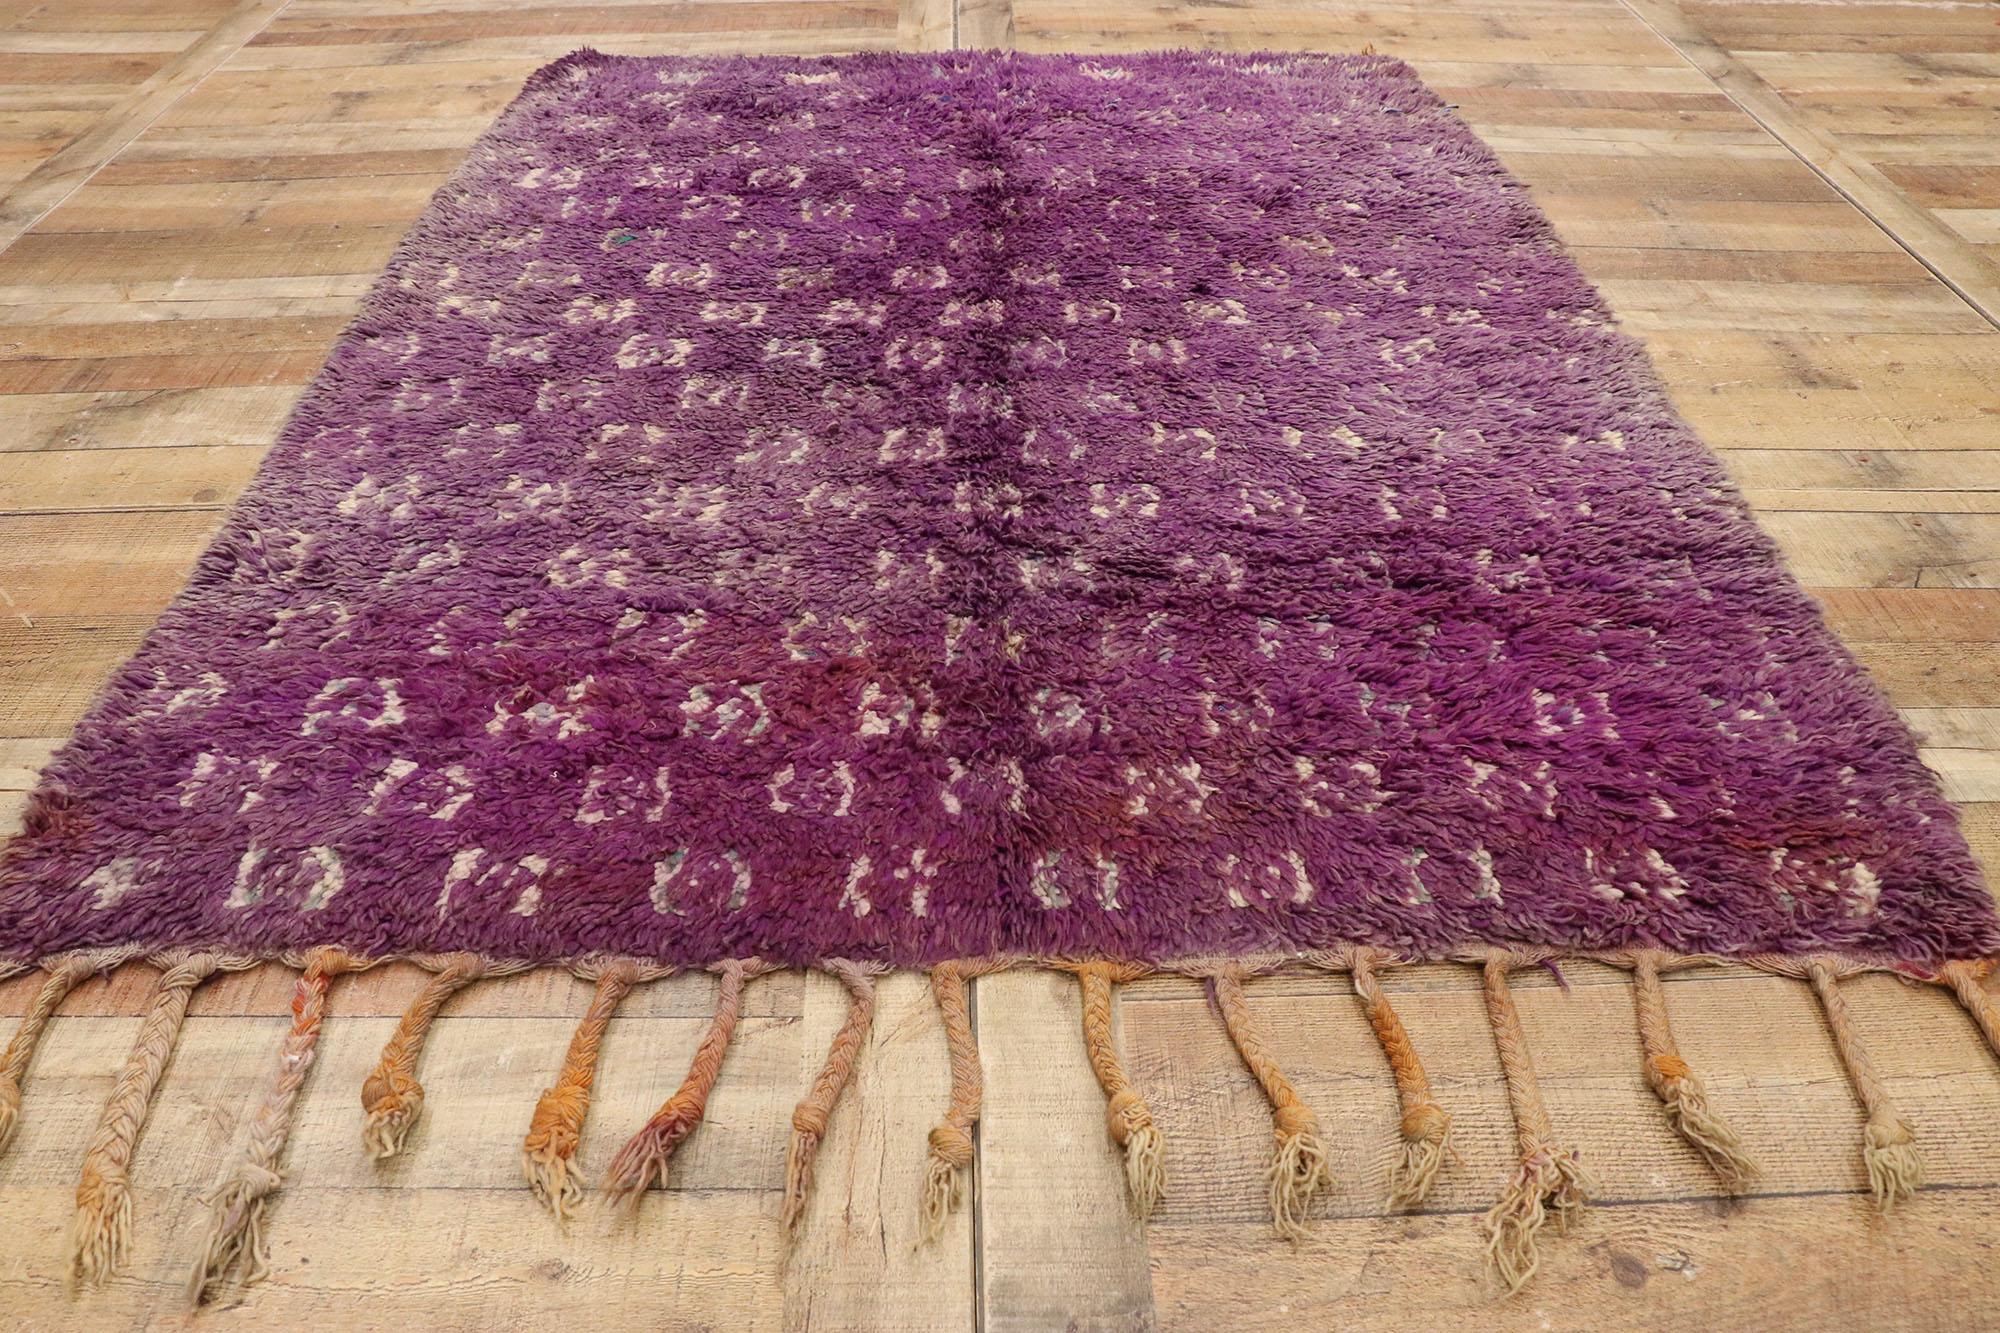 Vintage Berber Moroccan Rug with Modern Tribal Boho Chic Style For Sale 1